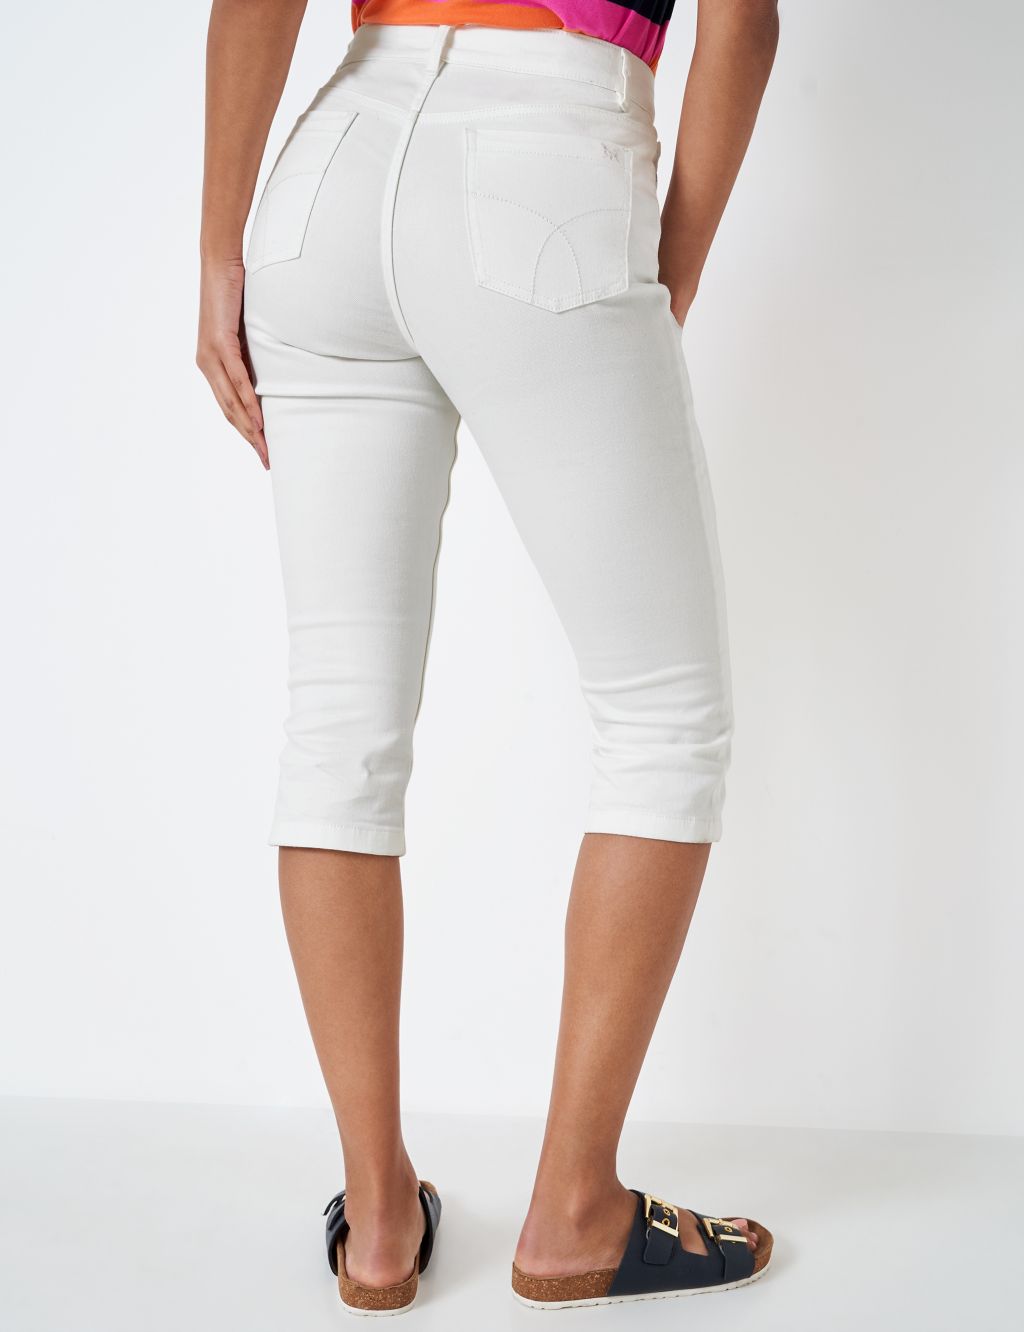 Skinny Cropped Jeans image 3